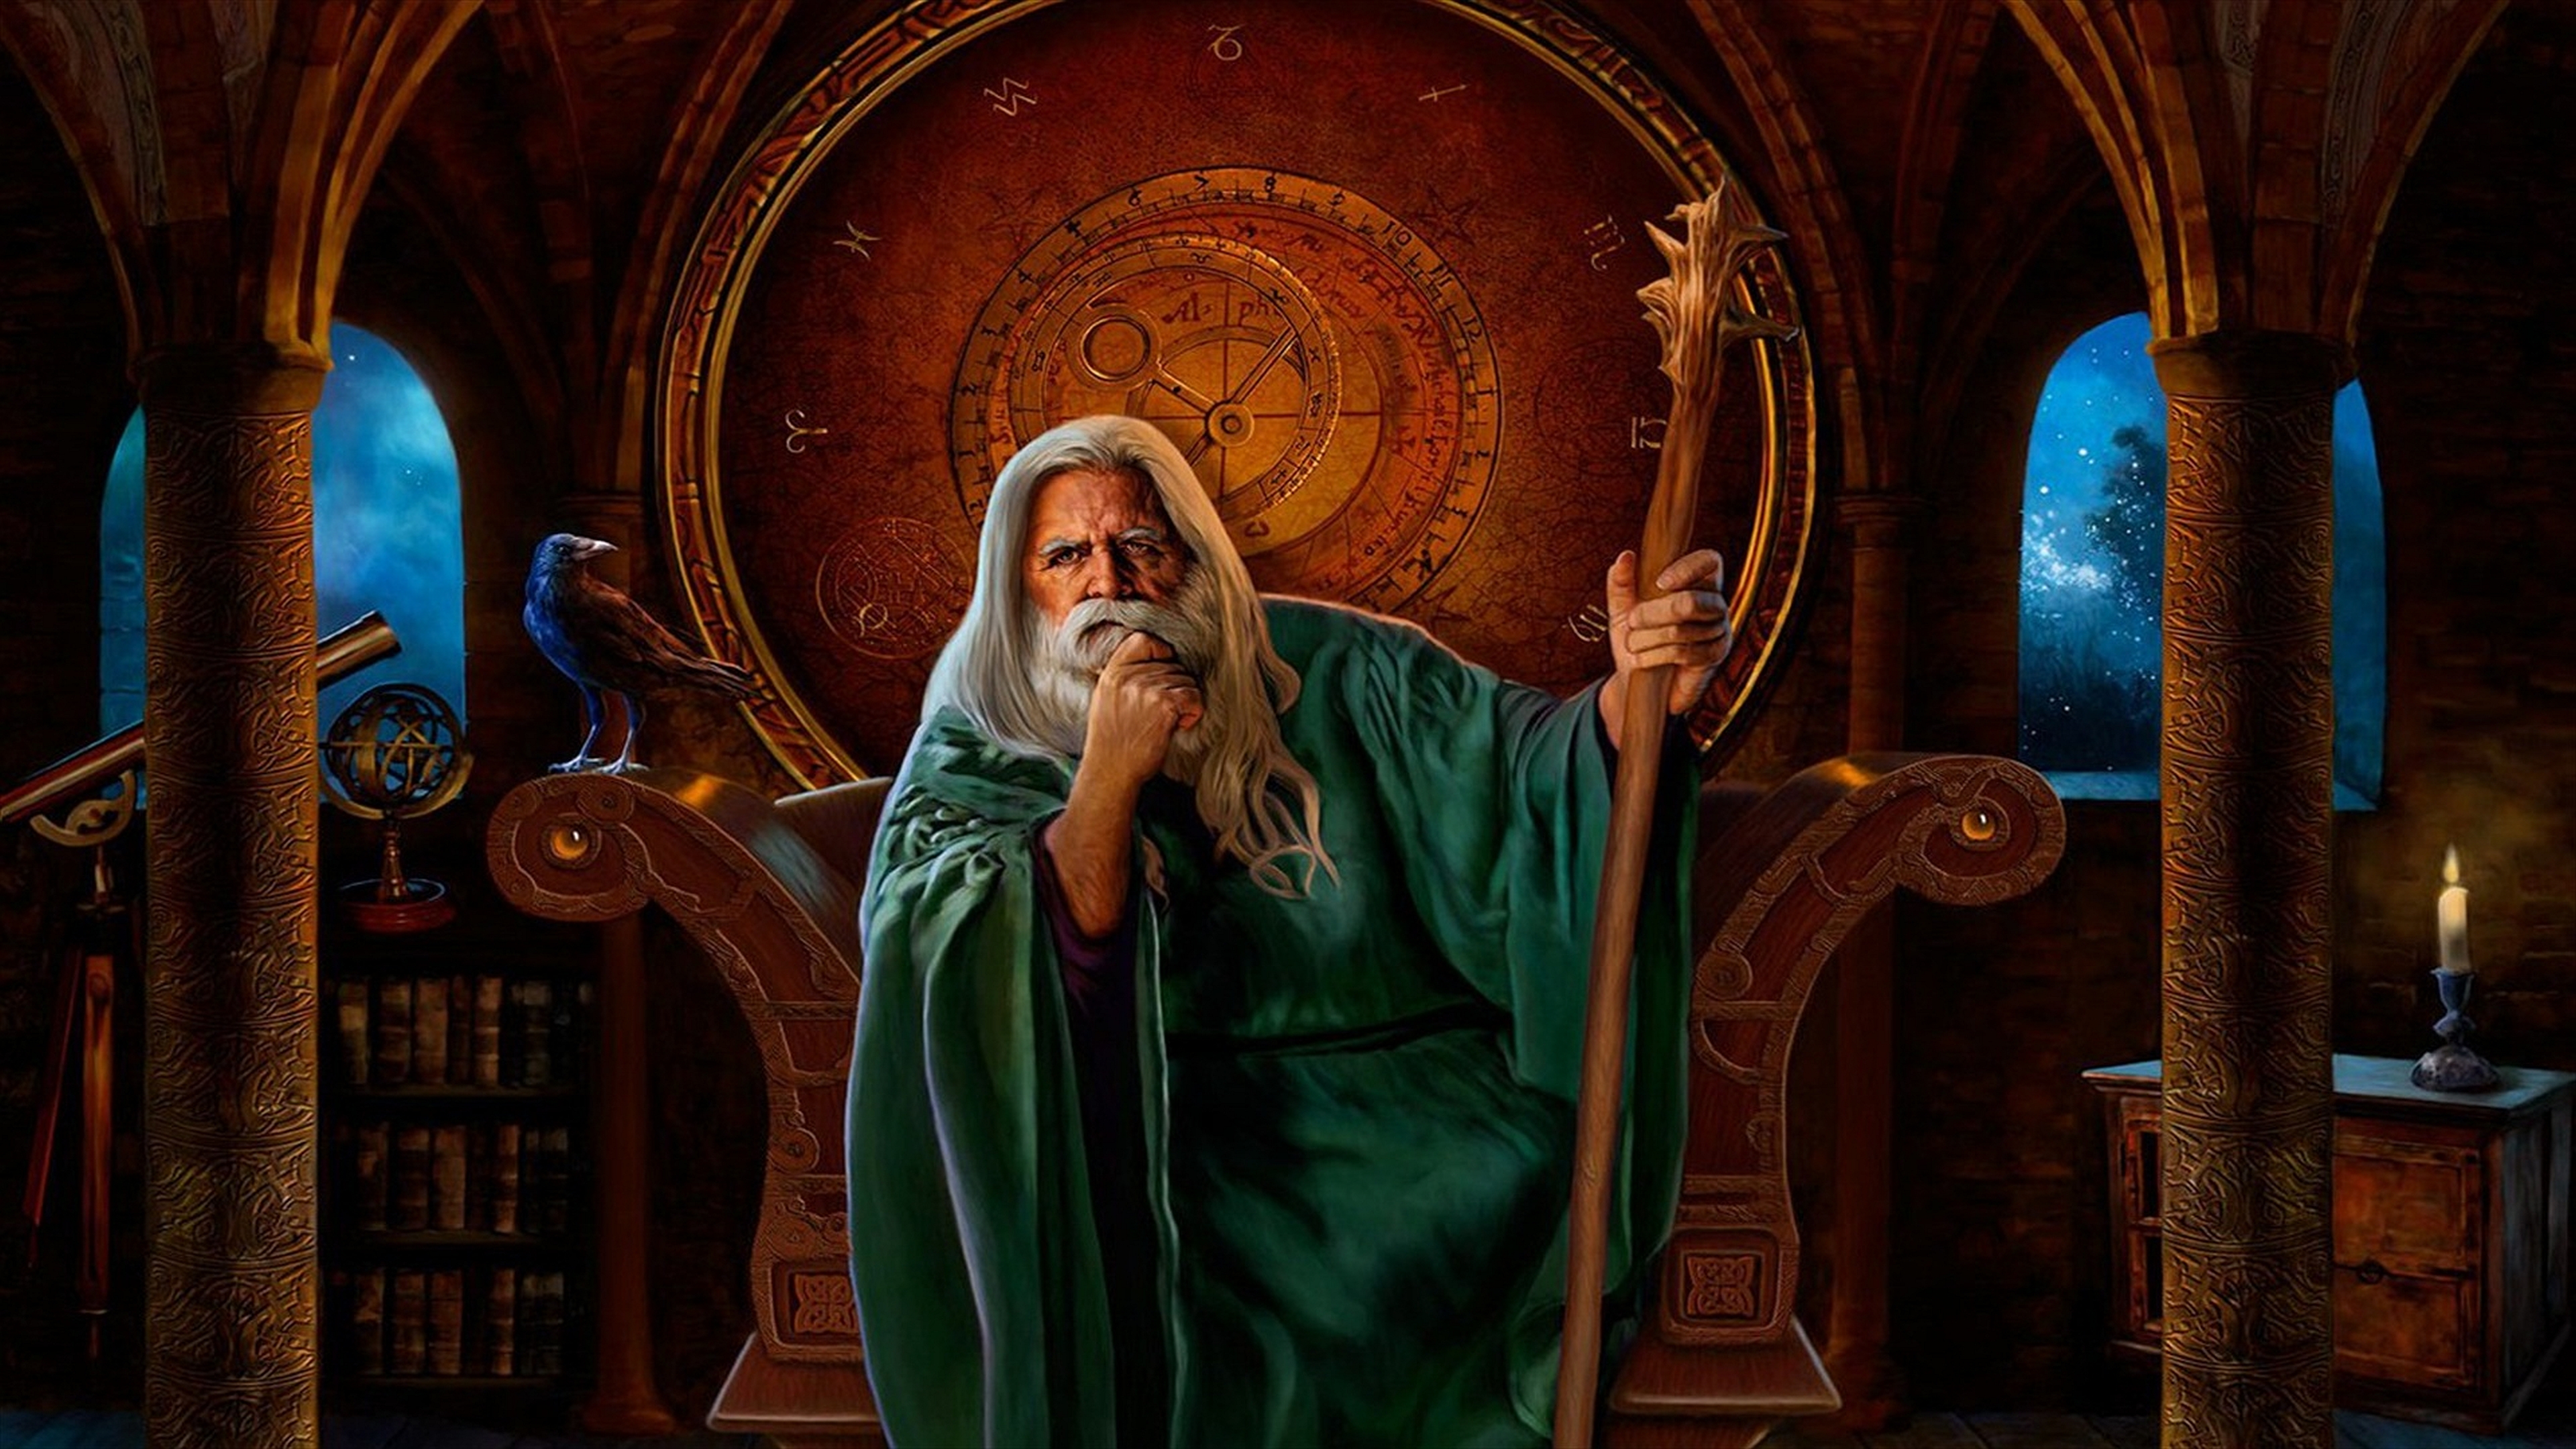 A majestic wizard conjuring magic in a mesmerizing fantasy scenery.